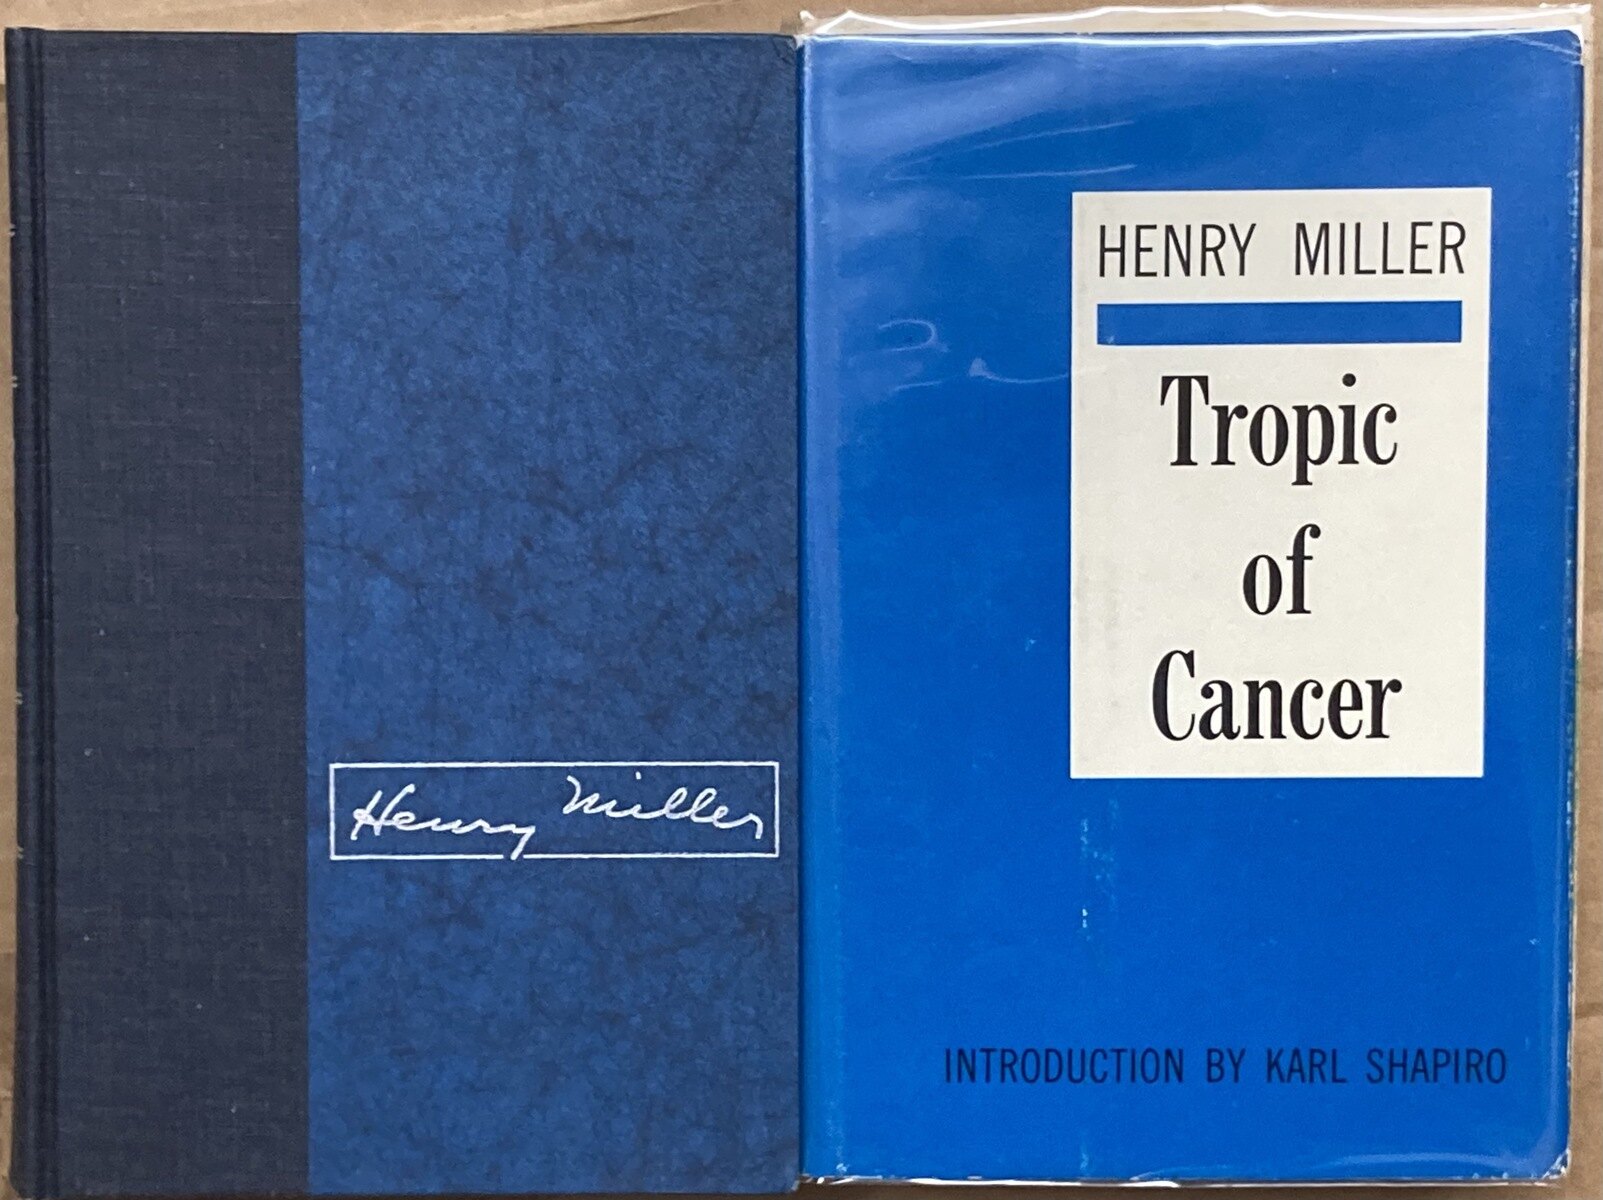 19-astounding-facts-about-tropic-of-cancer-henry-miller